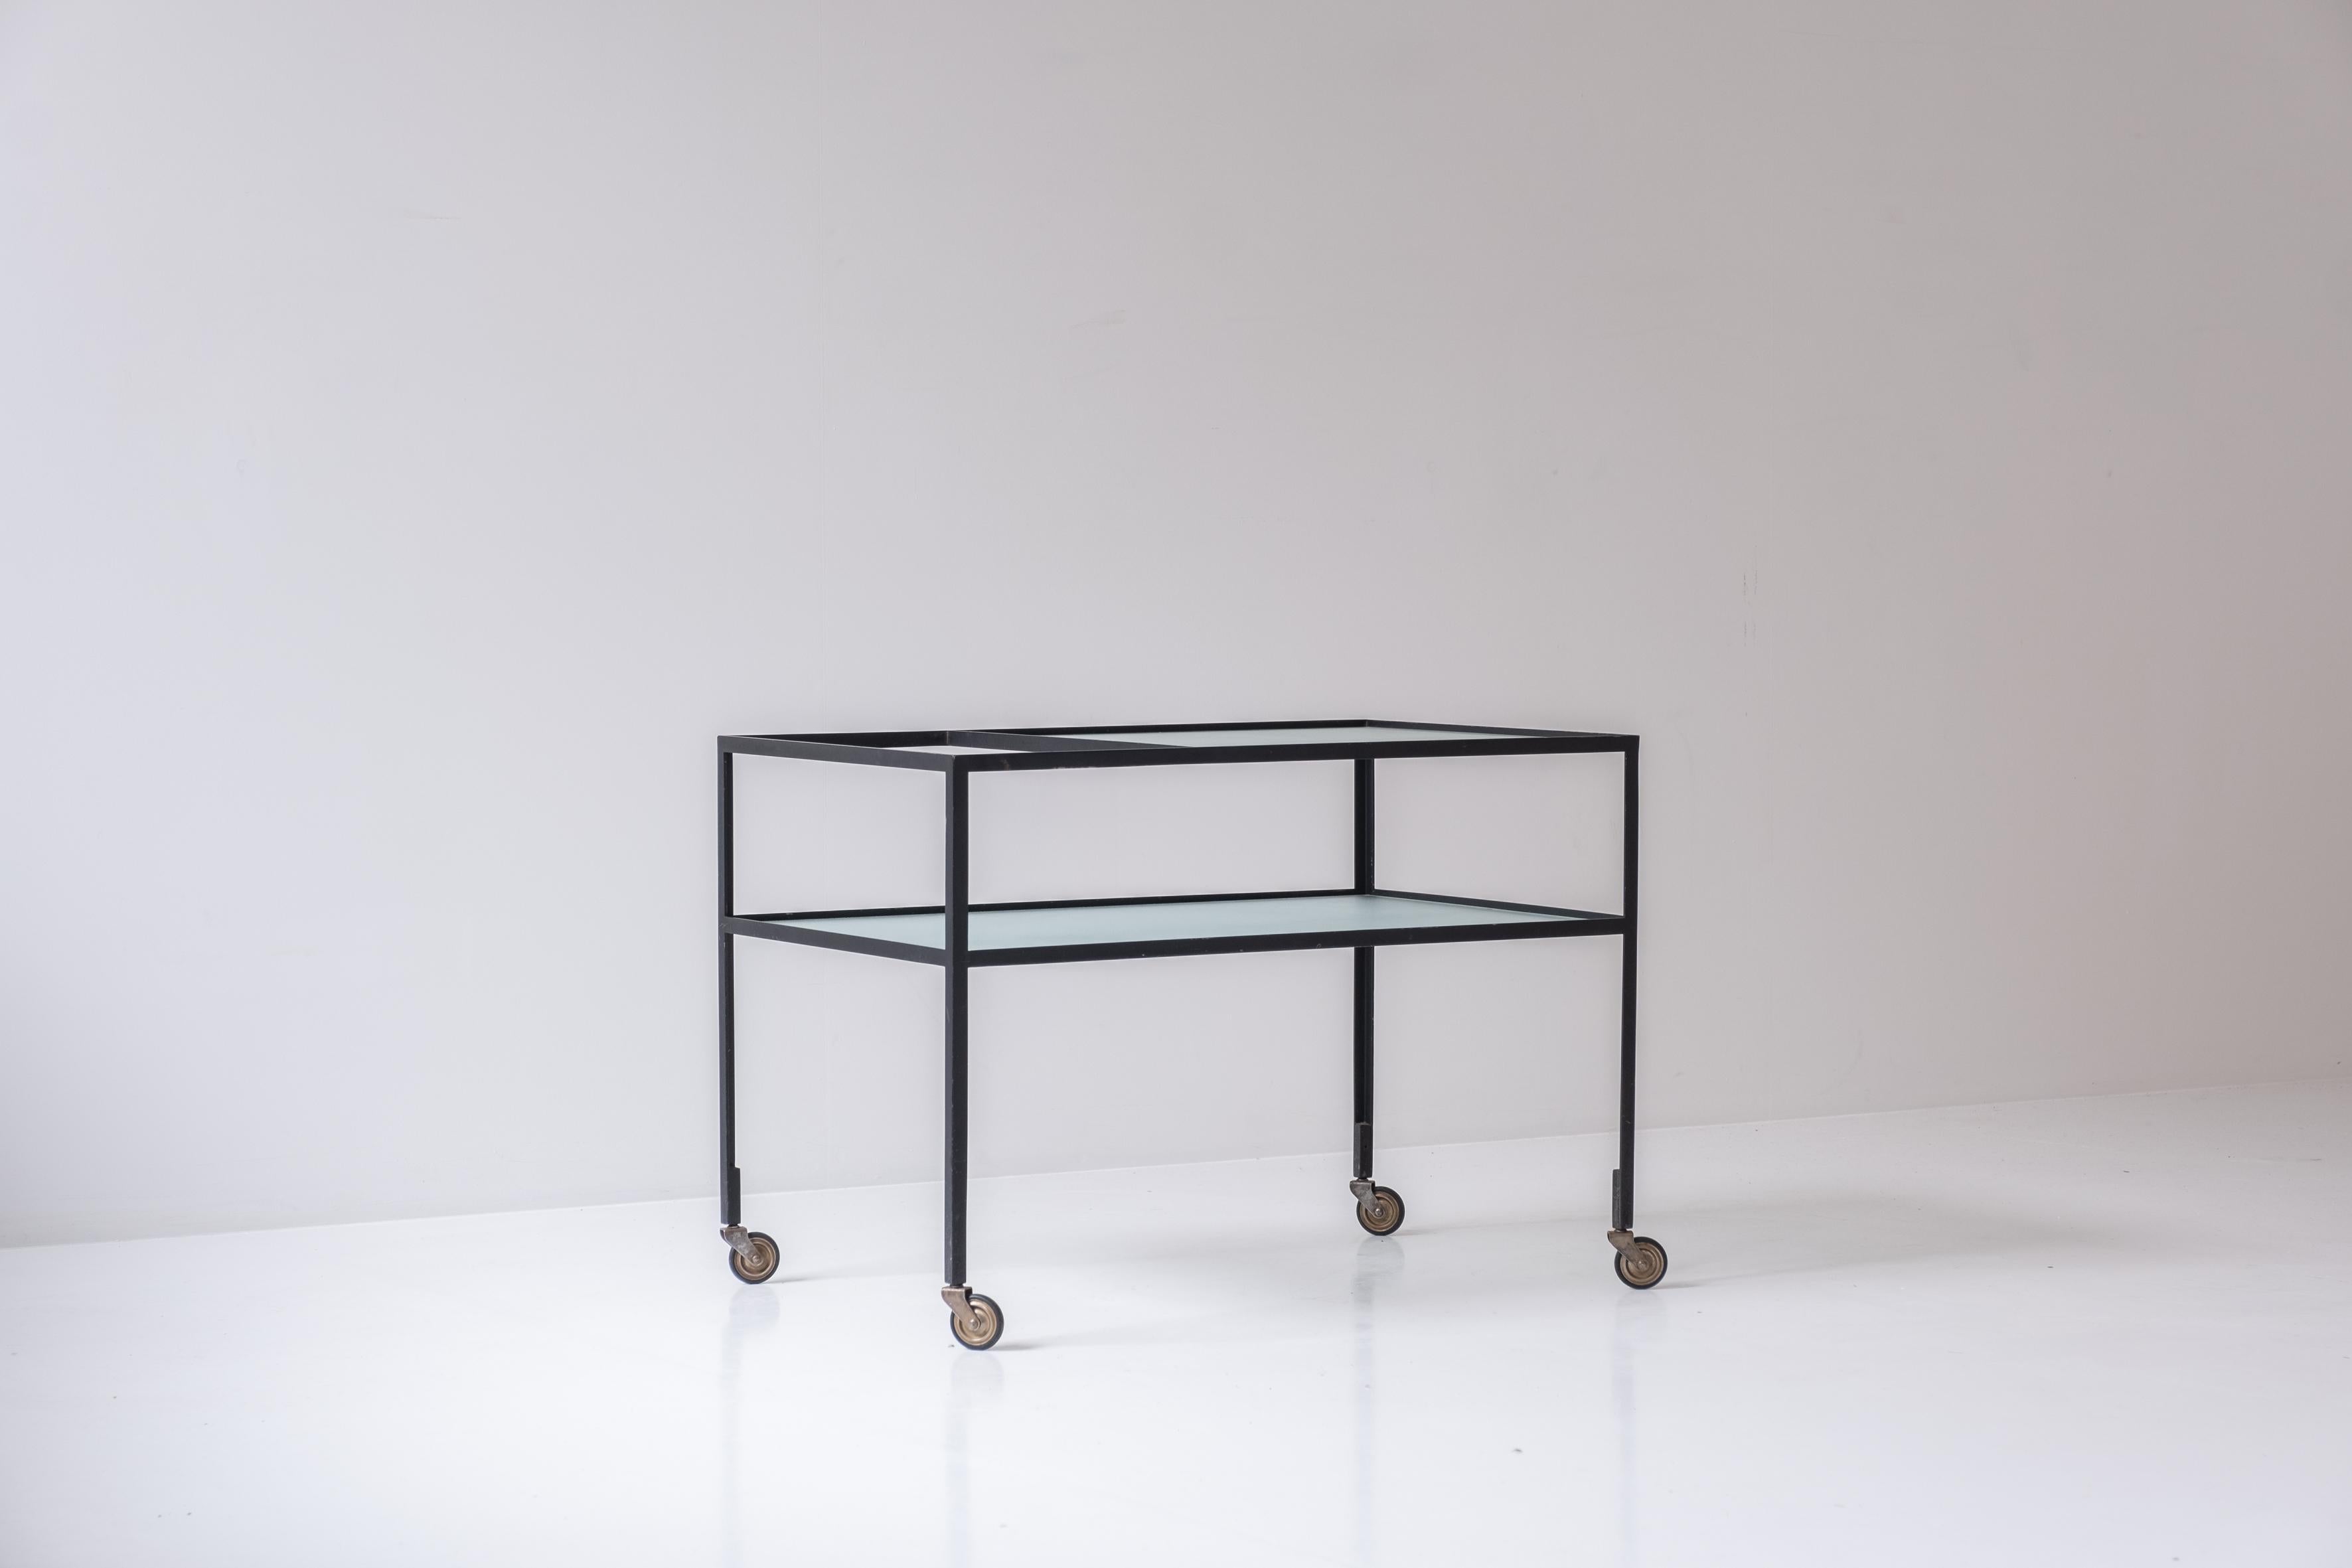 Mid-20th Century Serving Trolley by Herbert Hirche for Christian Holzäpfel KG, Germany, 1956 For Sale